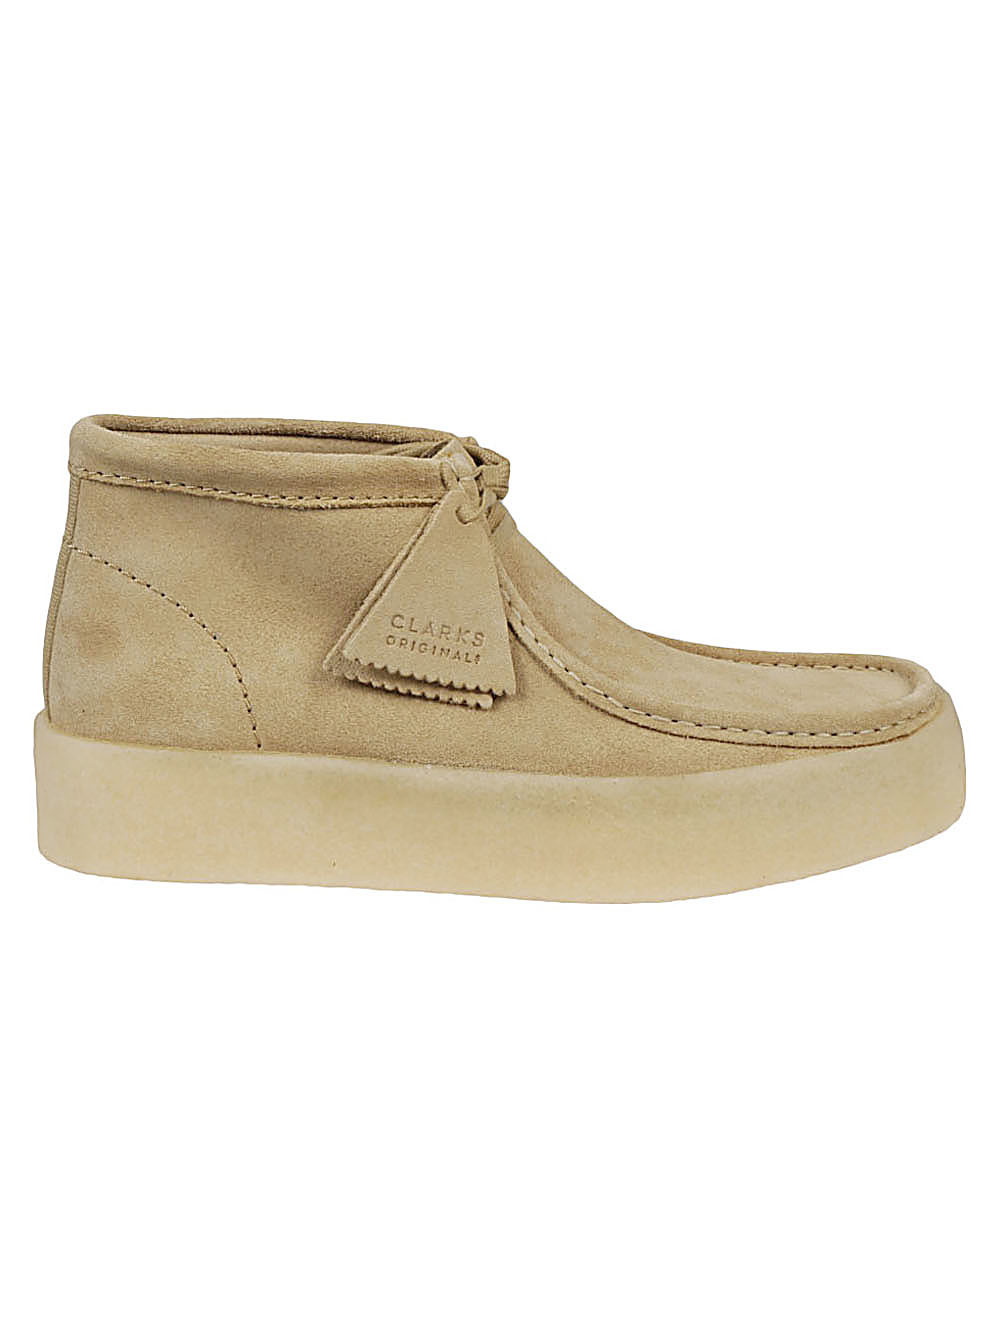 Photo: CLARKS - Wallabee Cup Bt Suede Leather Shoes